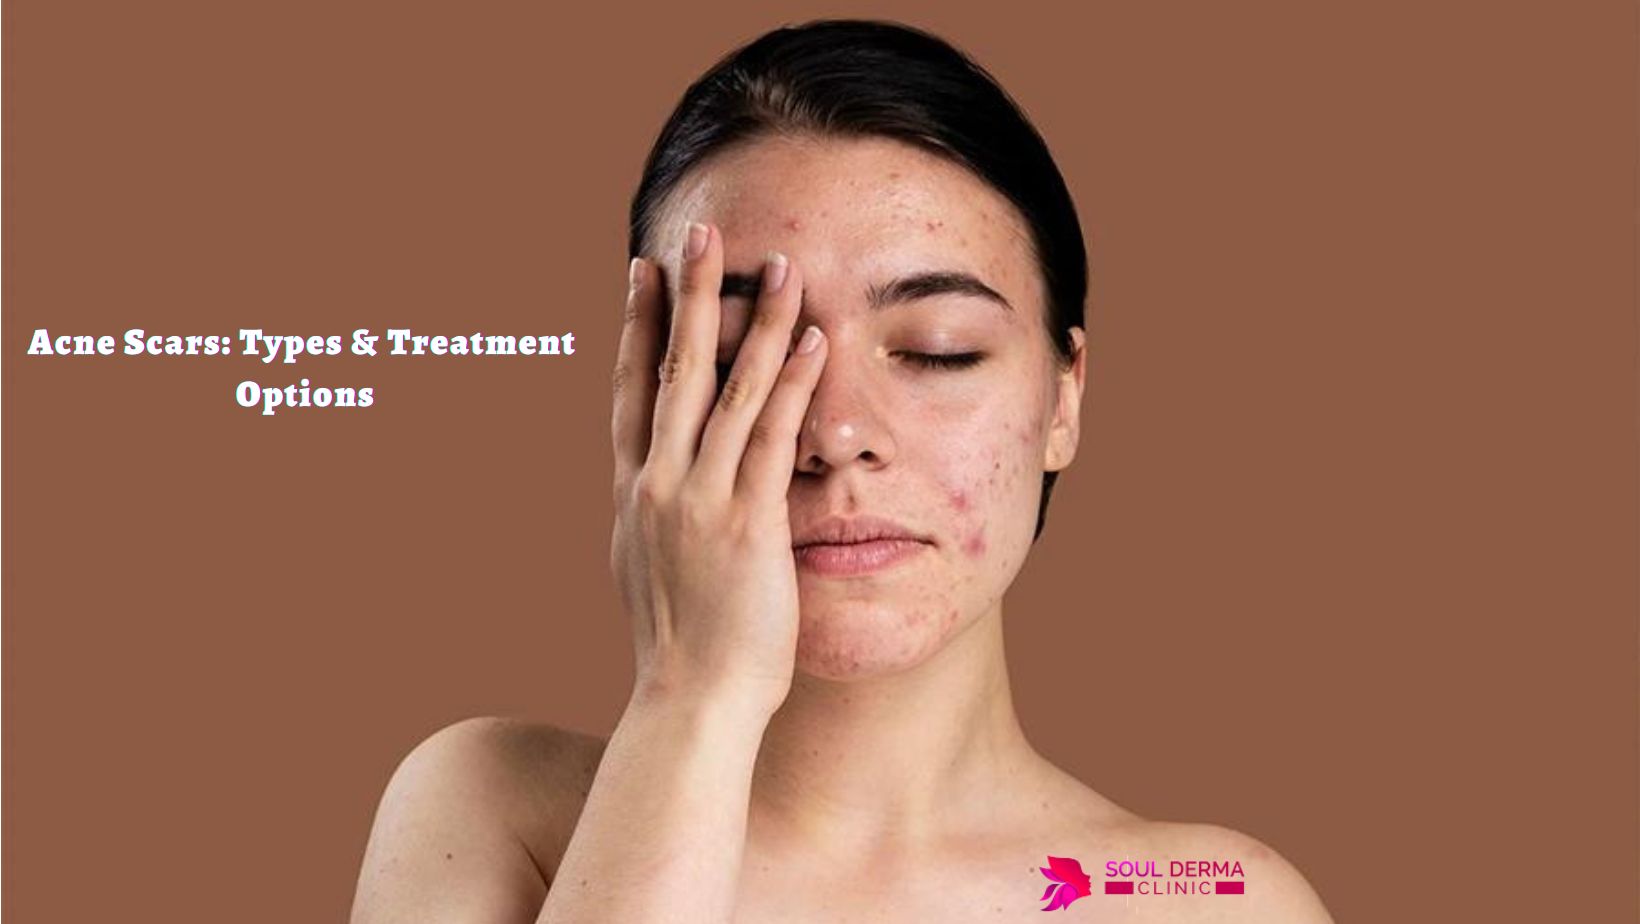 Acne Scars Types & Treatment Options